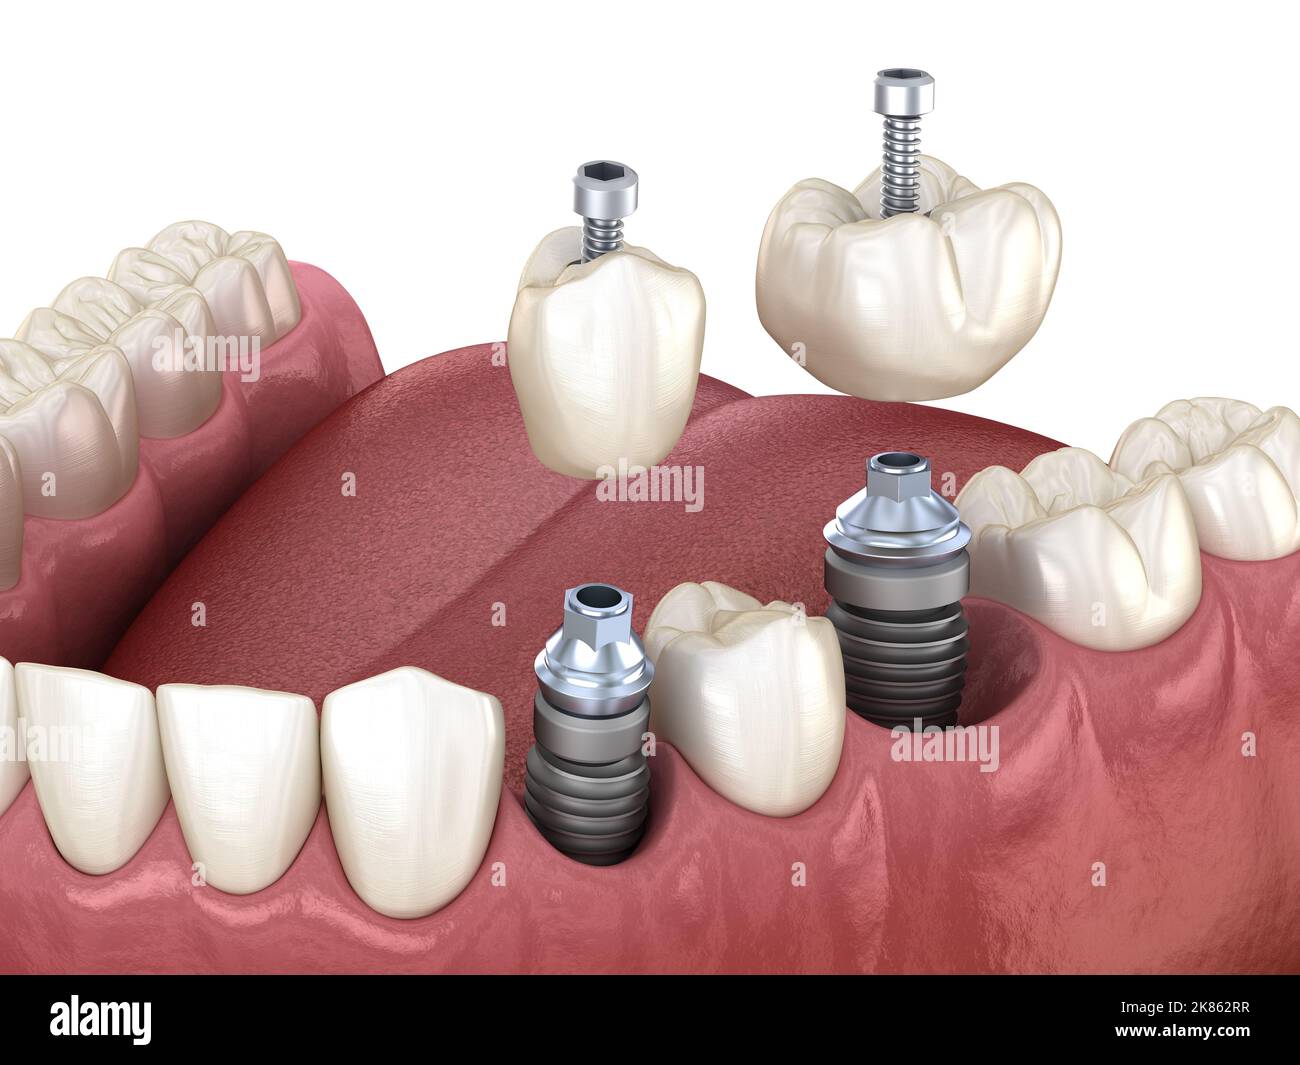 Premolar and Molar tooth crown installation over implant, screw fixation. 3D illustration of dental treatment Stock Photo